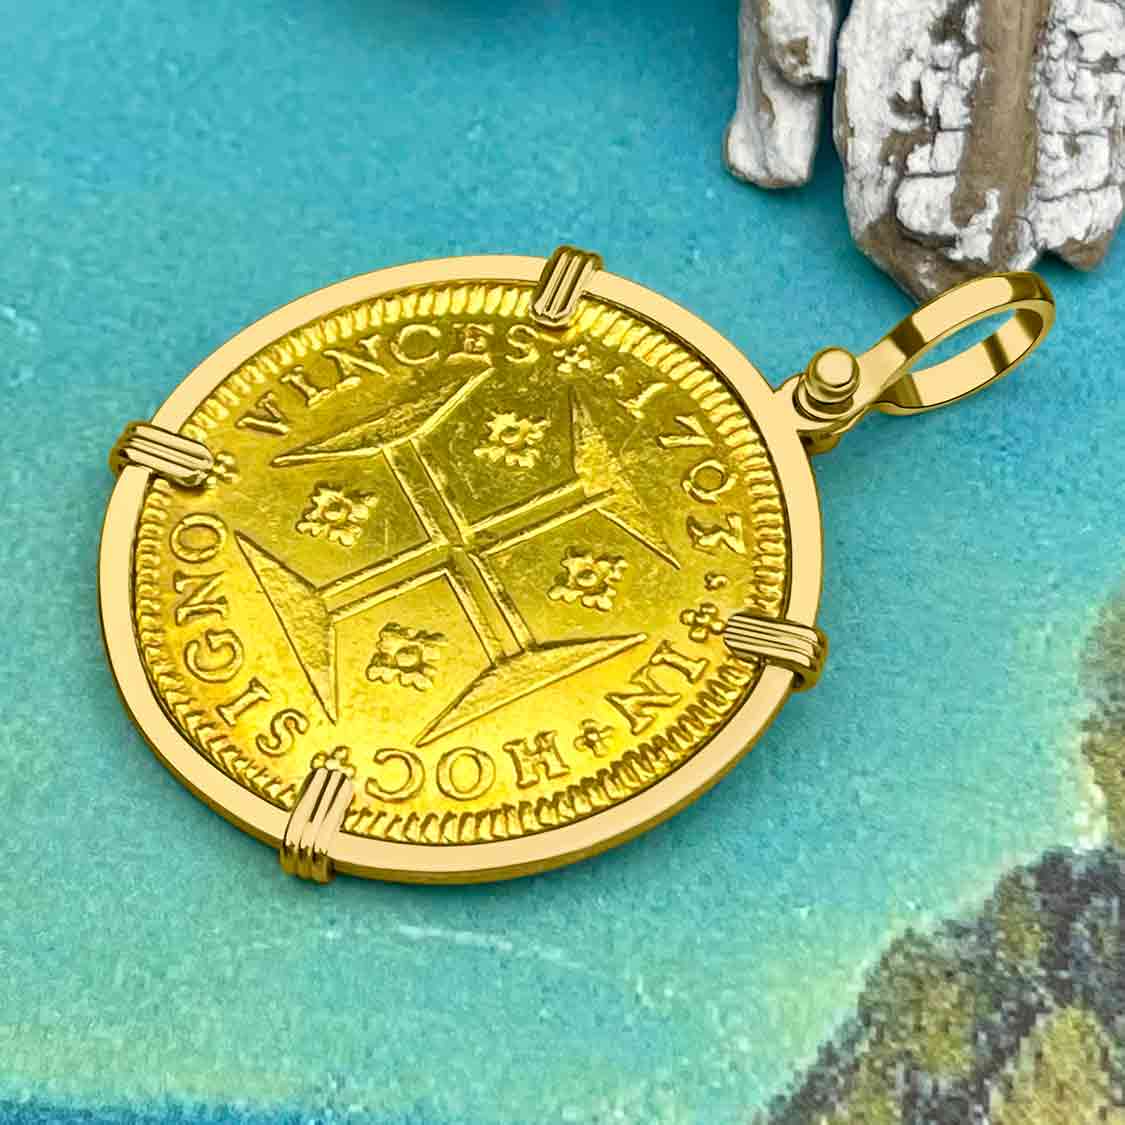 EXTREMELY RARE 1703 Portuguese 22K Gold 4000 Reis &quot;In This Sign Conquer&quot; Crusaders&#39; Cross 18K Gold Coin Pendant